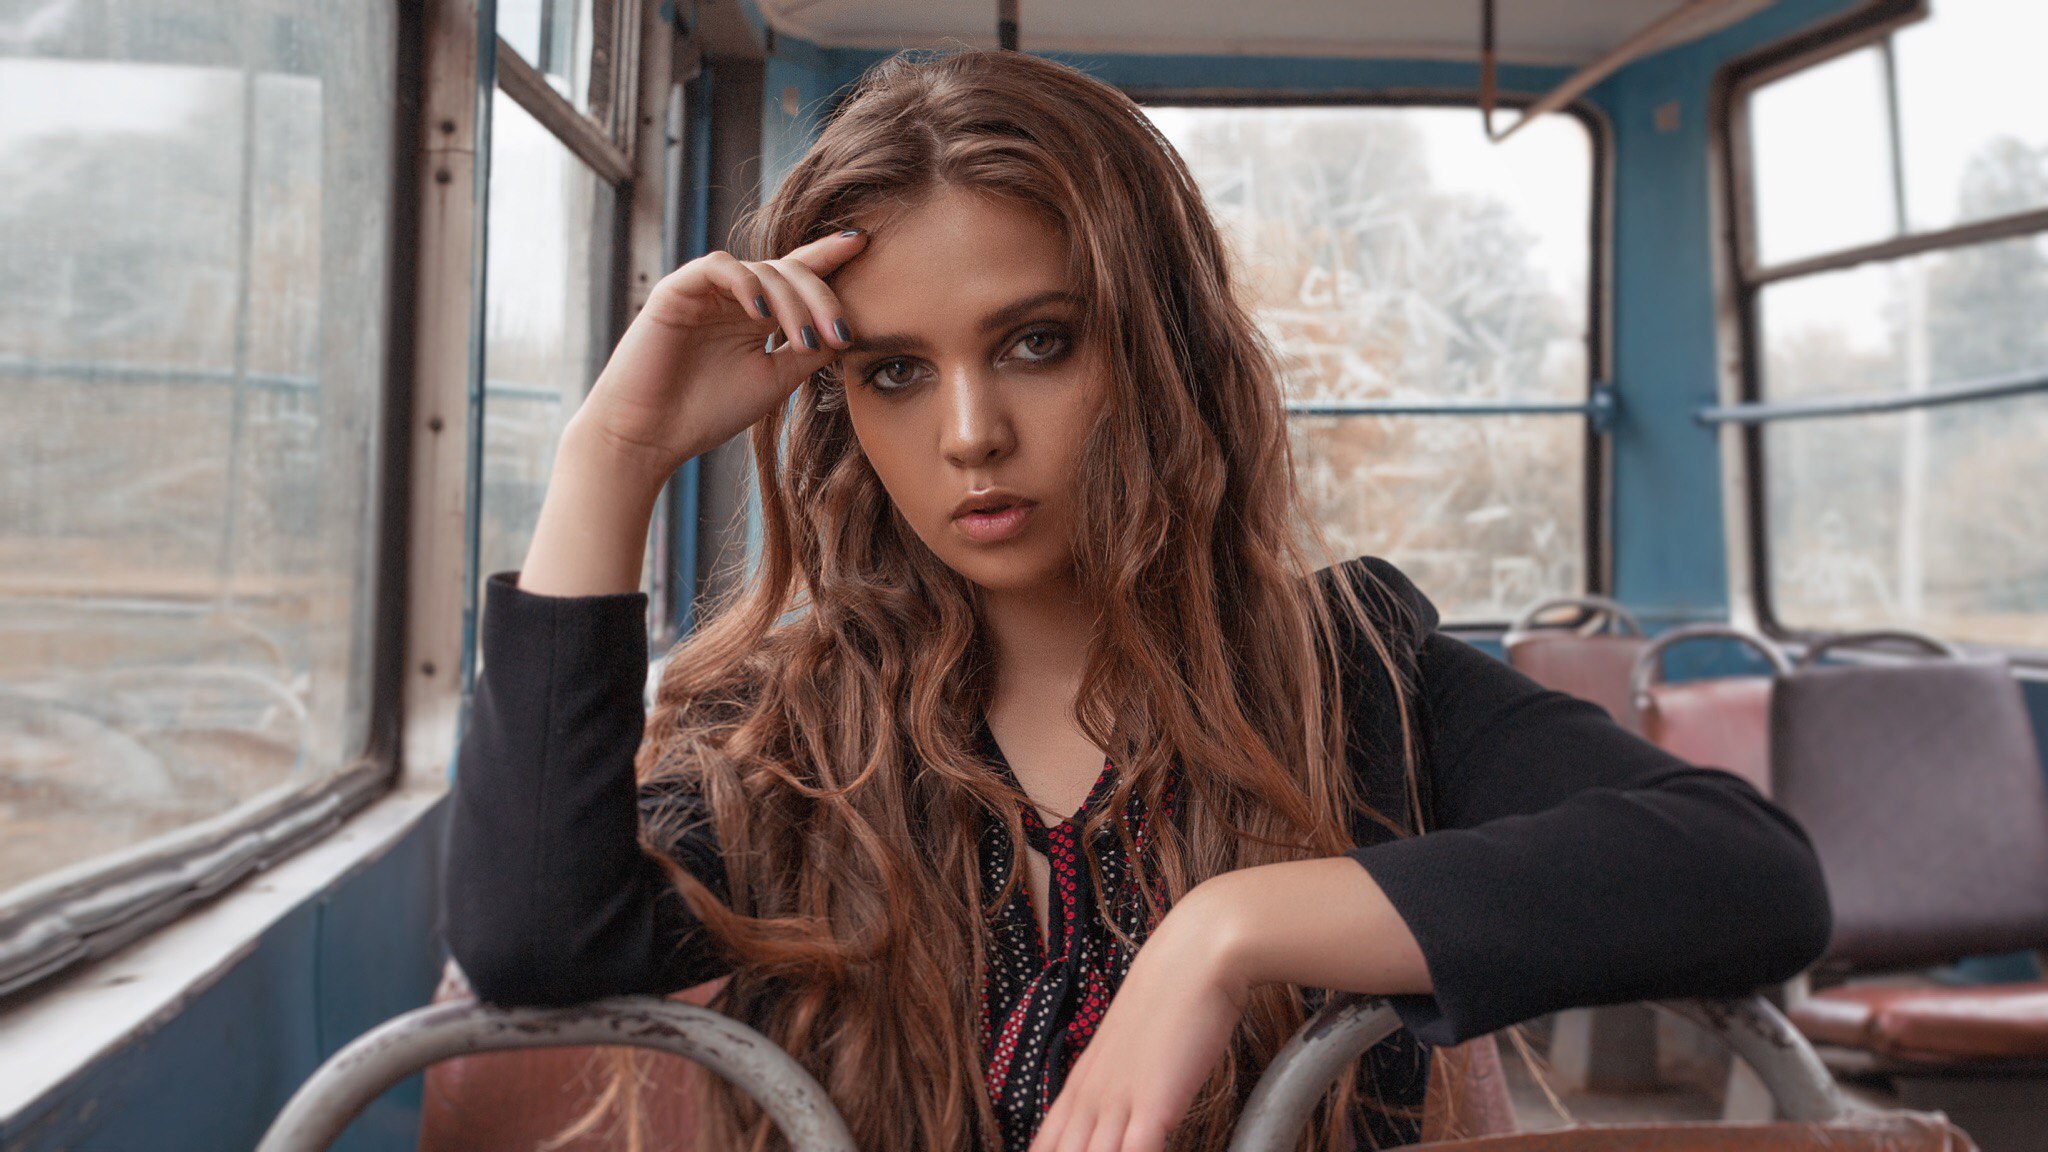 People 2048x1152 women brunette long hair wavy hair buses face tanned smoky eyes Maria Smirnova Artemy Mostovoy in bus model